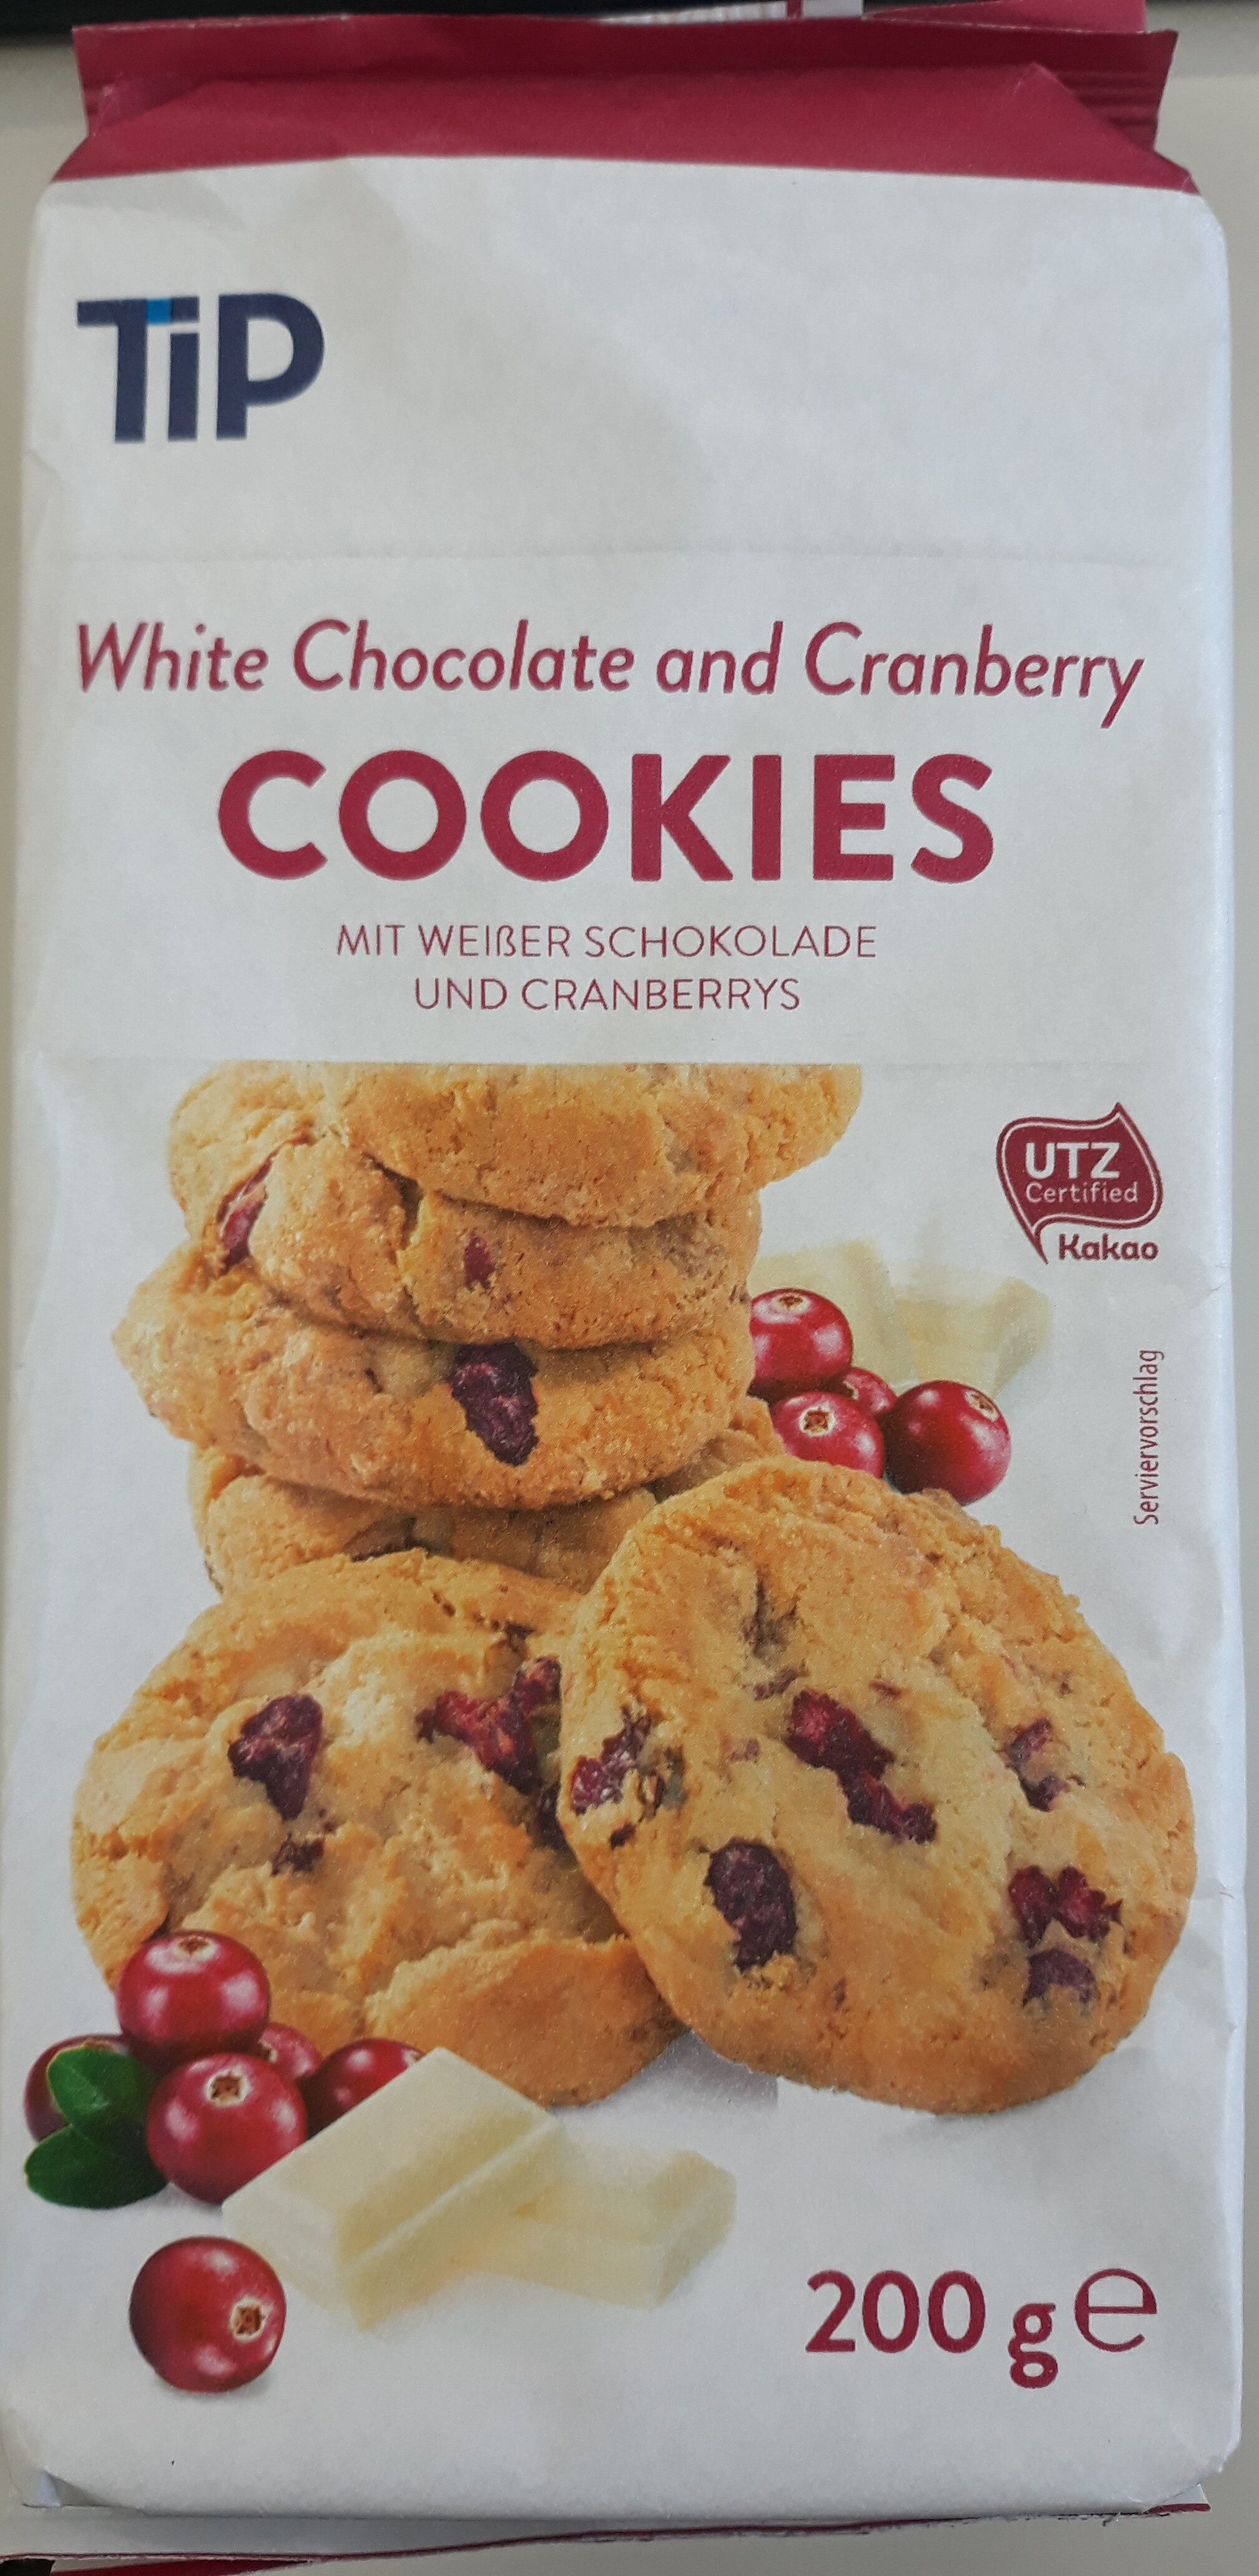 White Chocolate and Cranberry COOKIES - Produkt